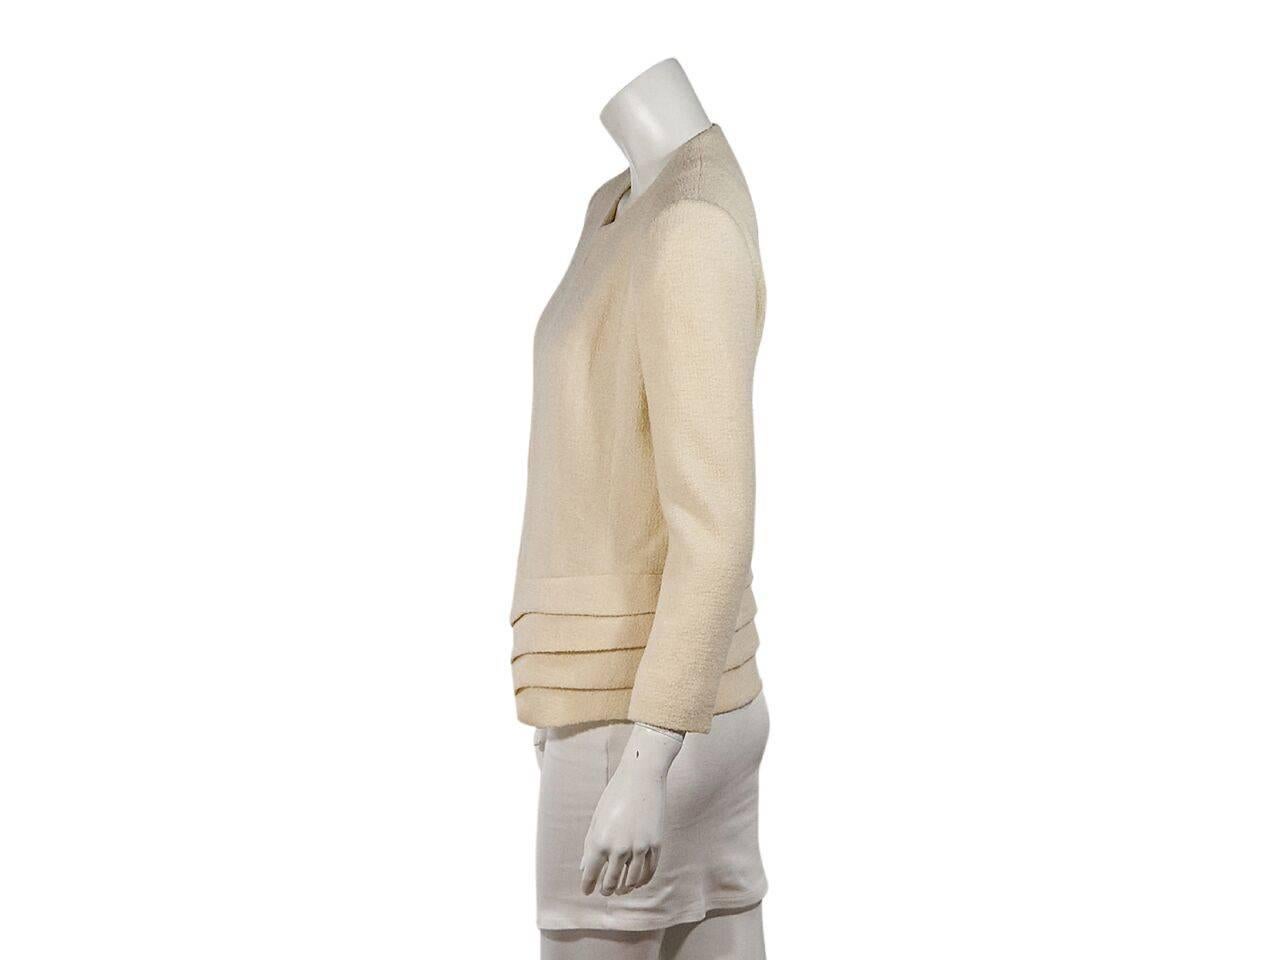 Product details:  Cream textured jacket by Christian Dior.  Crewneck.  Bracelet-length sleeves.  Concealed hook closure.  Pleated hem. 
Condition: Pre-owned. Very good.
Est. Retail $ 998.00